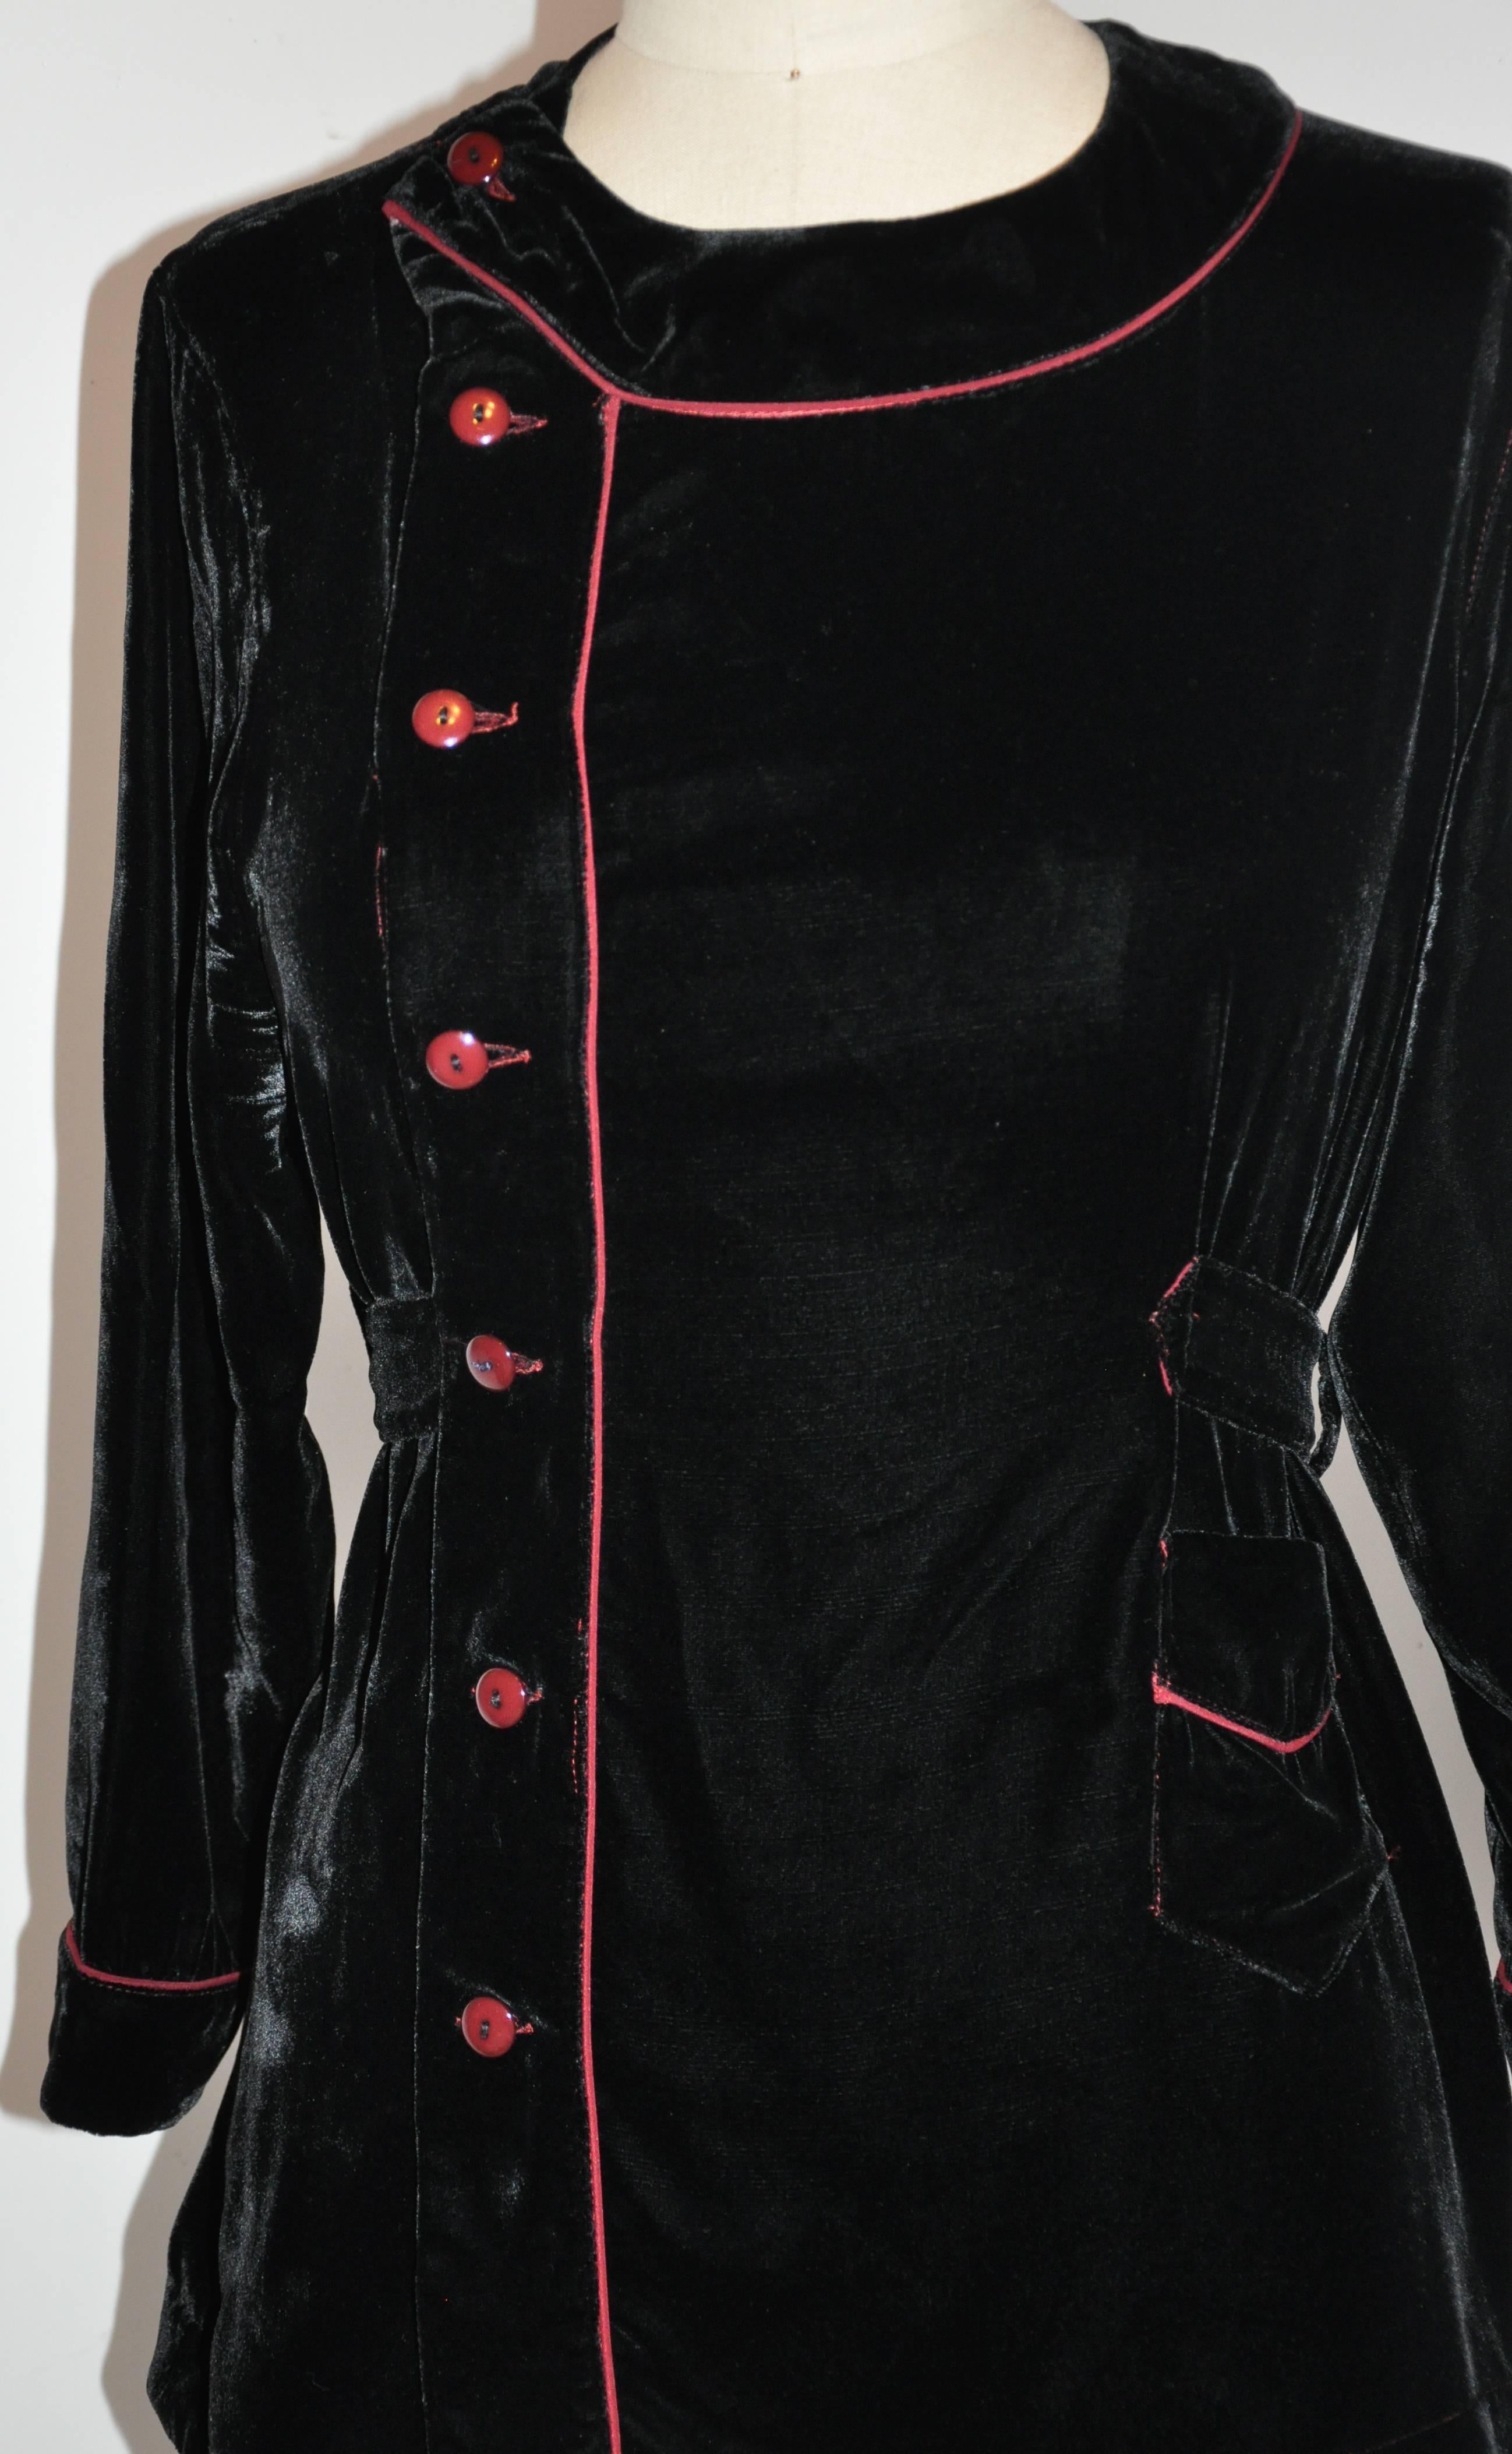         Jean Paul Gaultier black velvet top is accented with Bordeaux silk piping and matching buttons. The waistband is adjustable with three buttons on either side of the backside. The front has four buttons as well as a patch pocket with